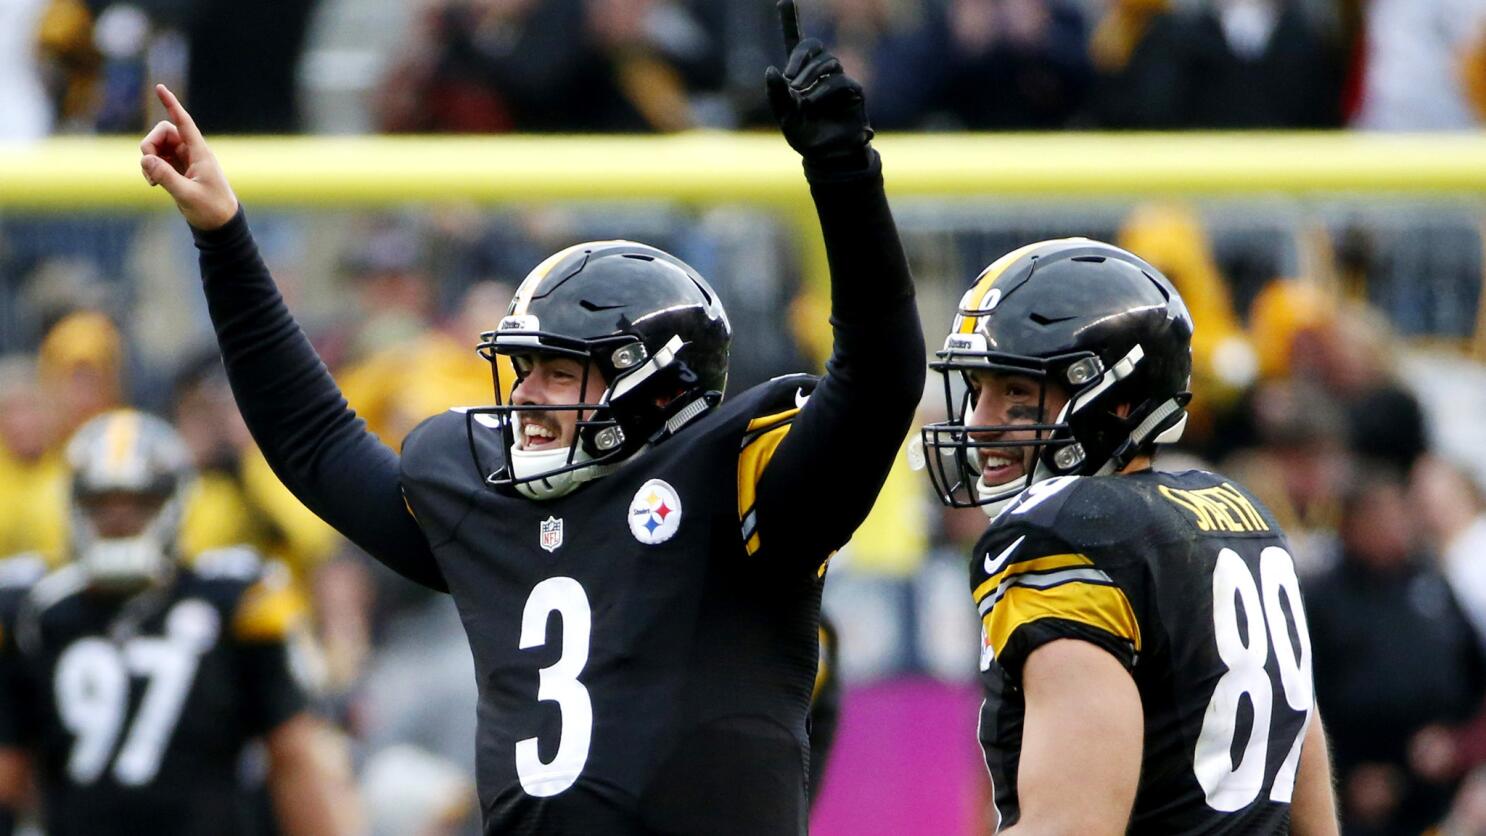 Steelers win 7th straight over Panthers [Full Game Recap]